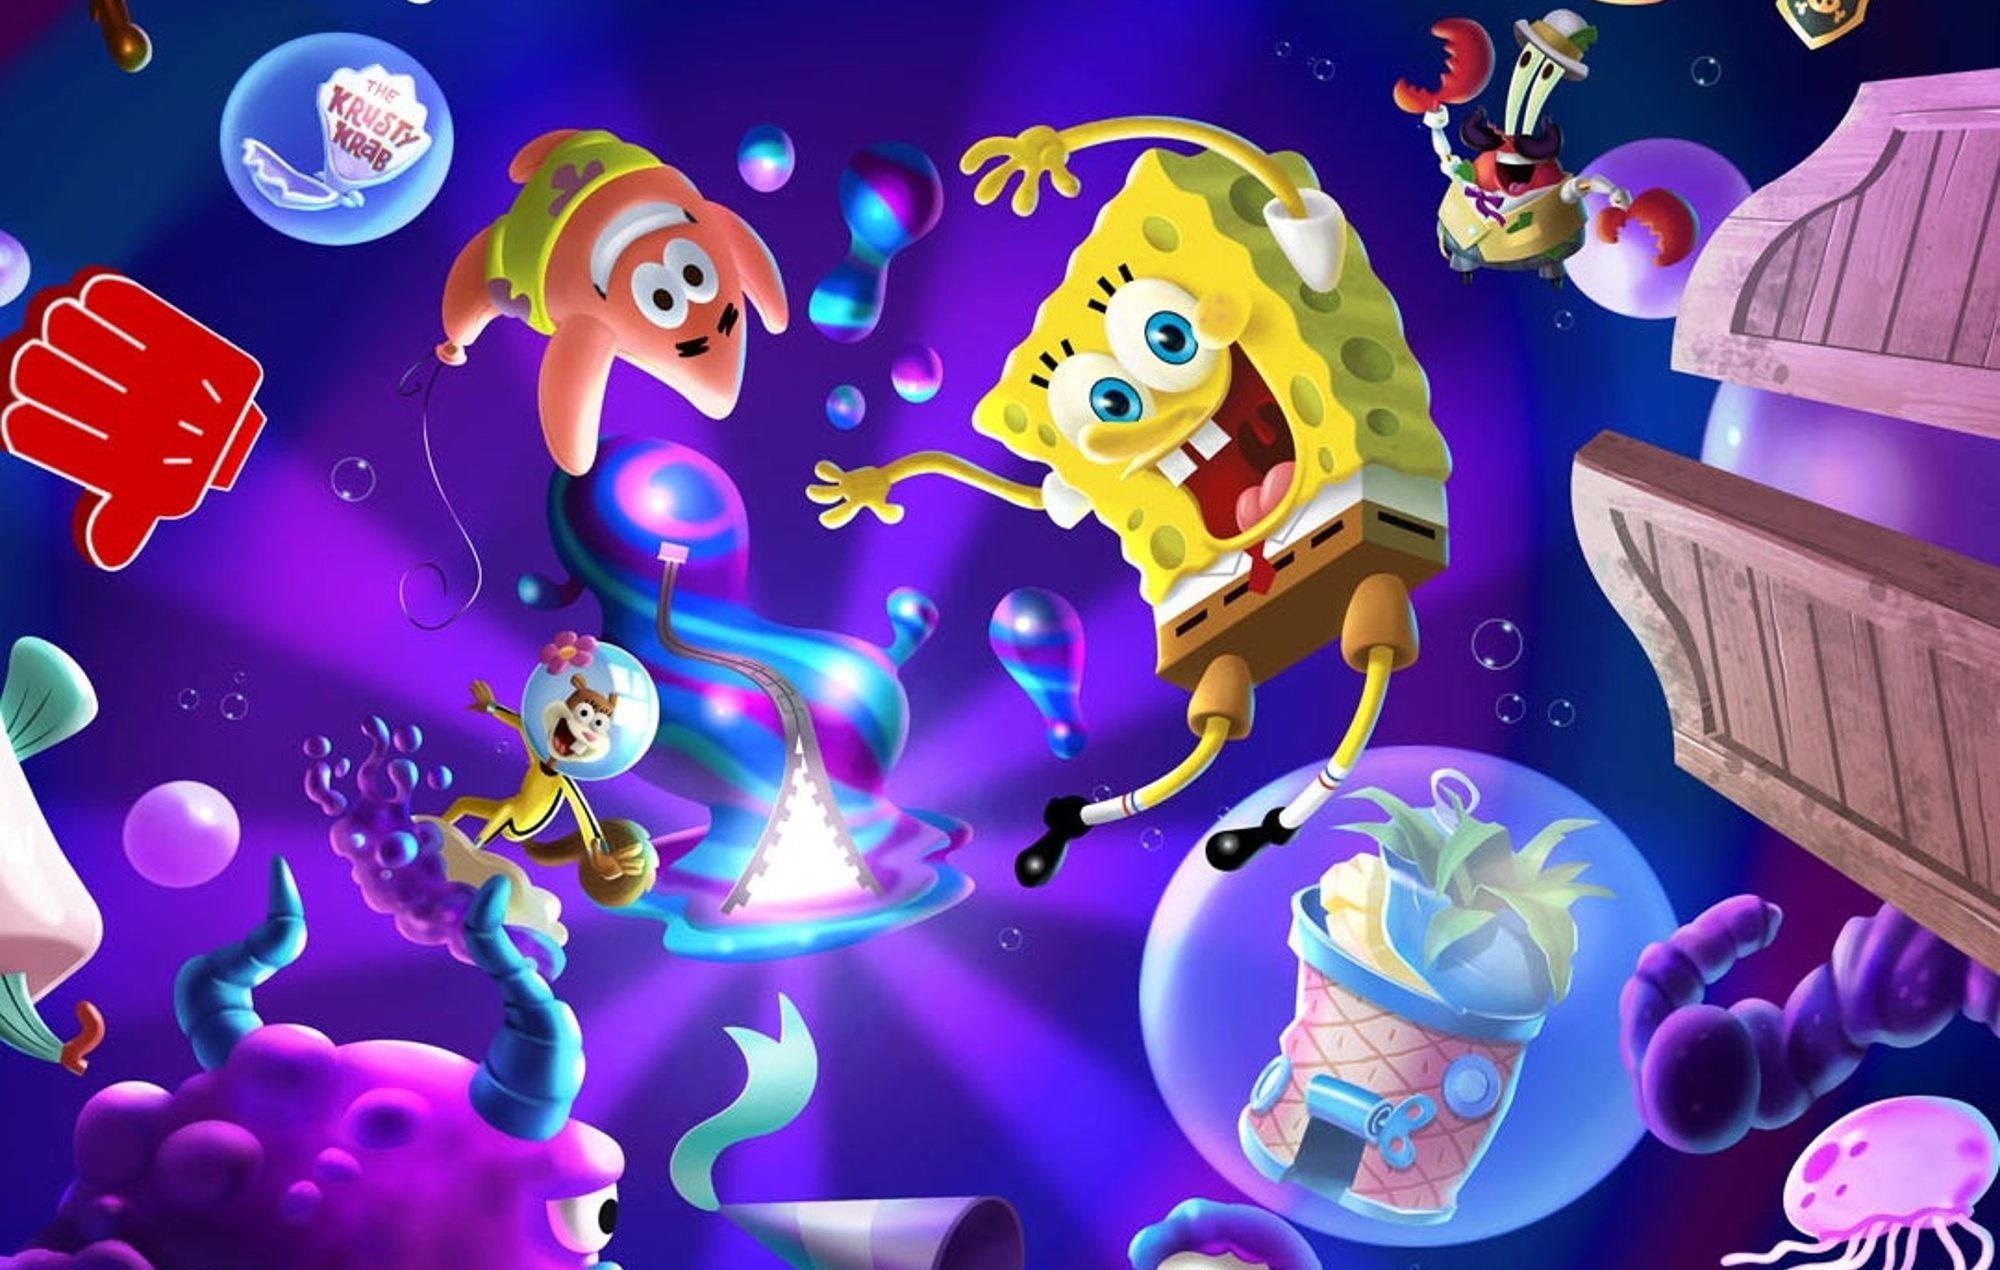 PS Plus June 2024 Games: Spongebob, Patrick and more can be seen floating.